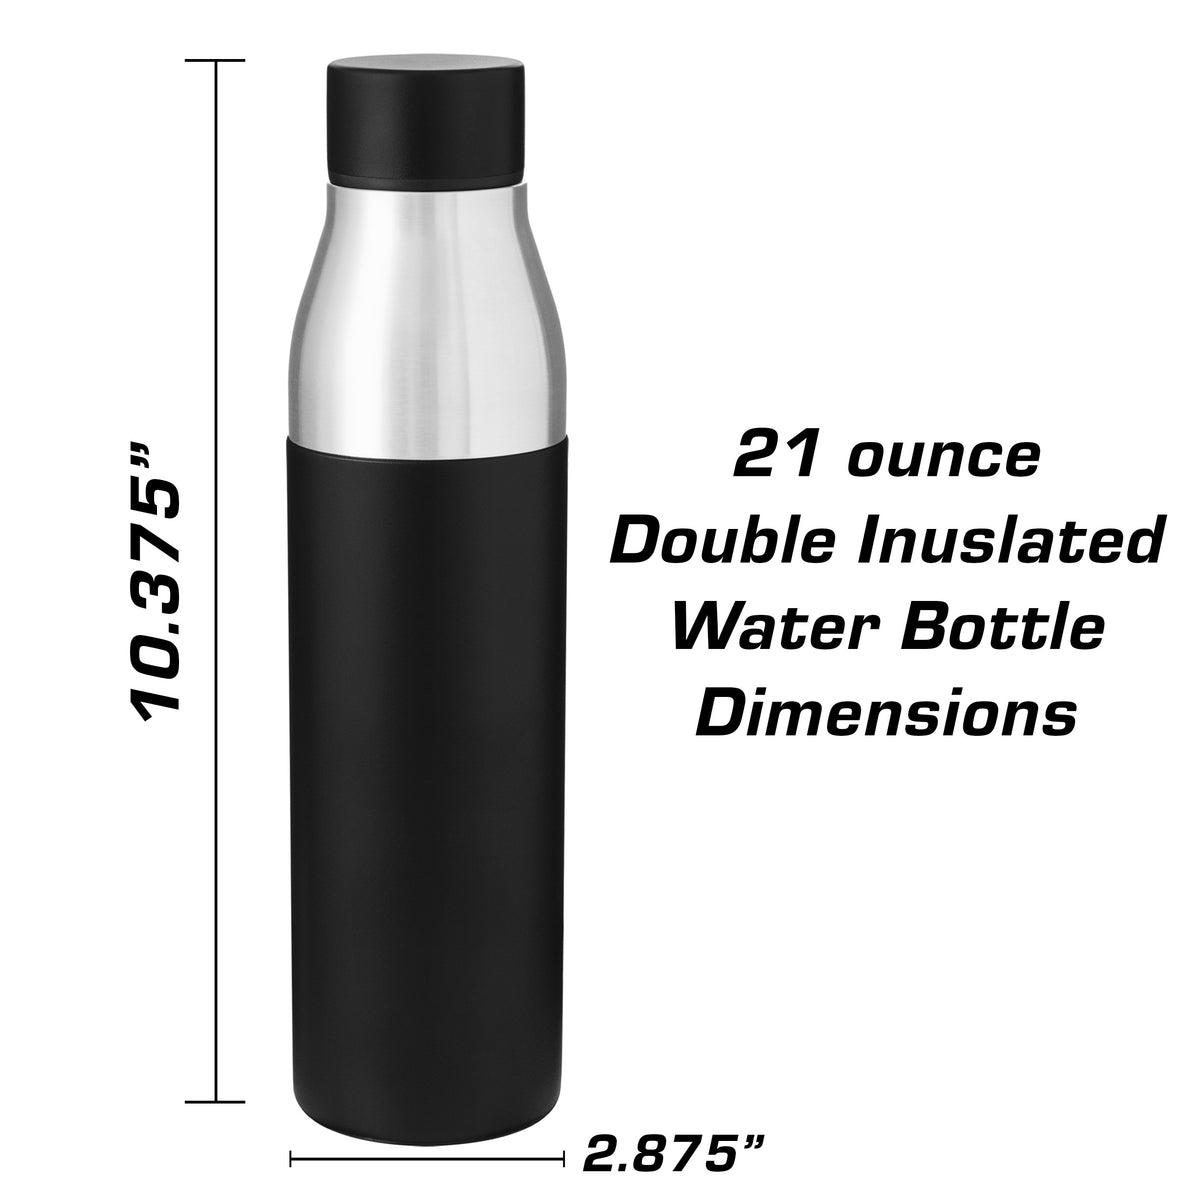 Porsche 911 991 GTS Coupe Insulated Stainless Steel Water Bottle - 21 oz